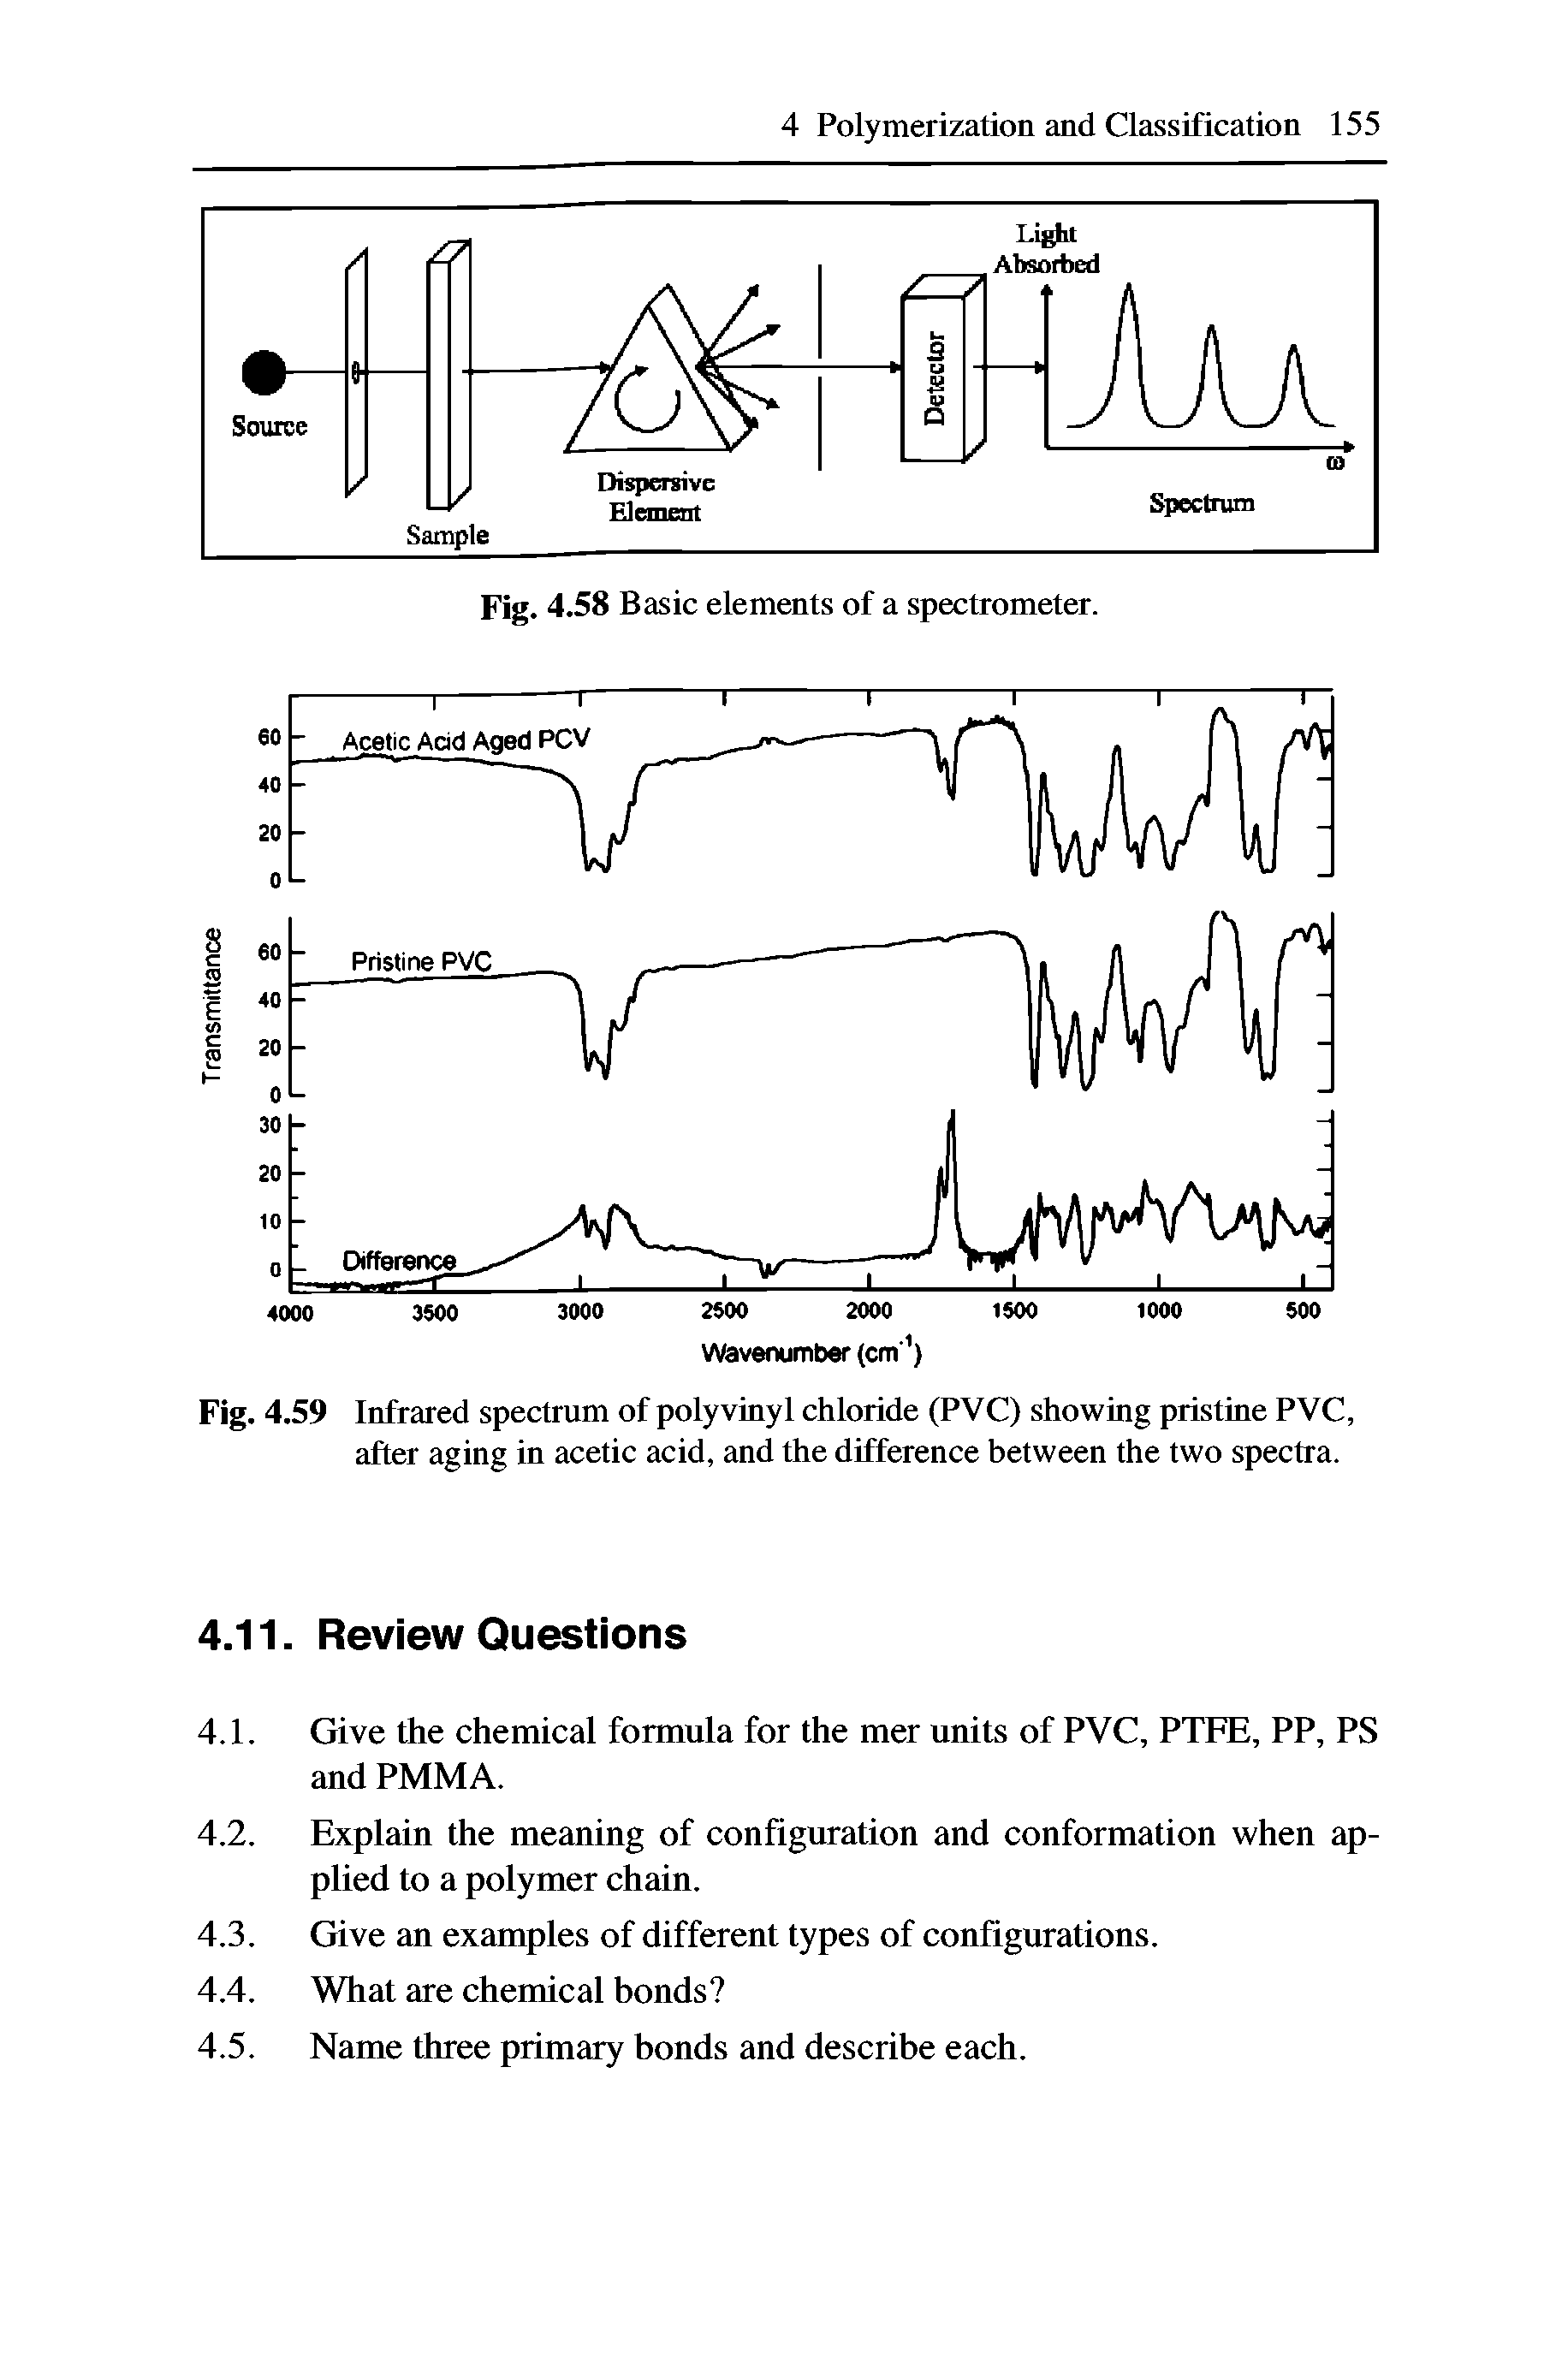 Fig. 4.59 Infrared spectrum of polyvinyl chloride (PVC) showing pristine PVC, after aging in acetic acid, and the difference between the two spectra.